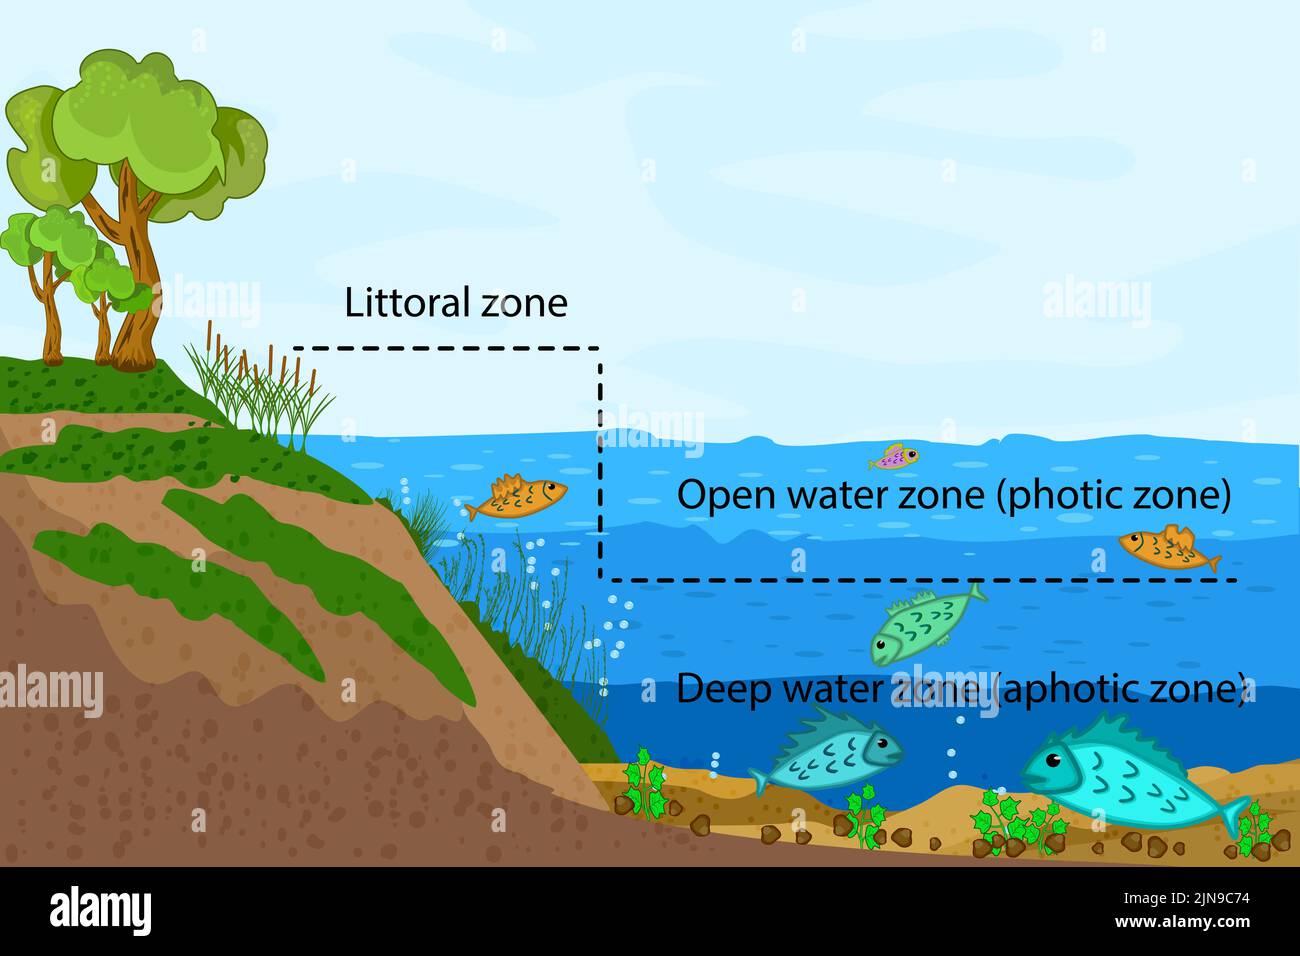 Lake ecosystem.Zonation in lake water infographic.Freshwater pond zones diagram.Lake ecosystems division into littoral, pen water and deep water zones Stock Vector